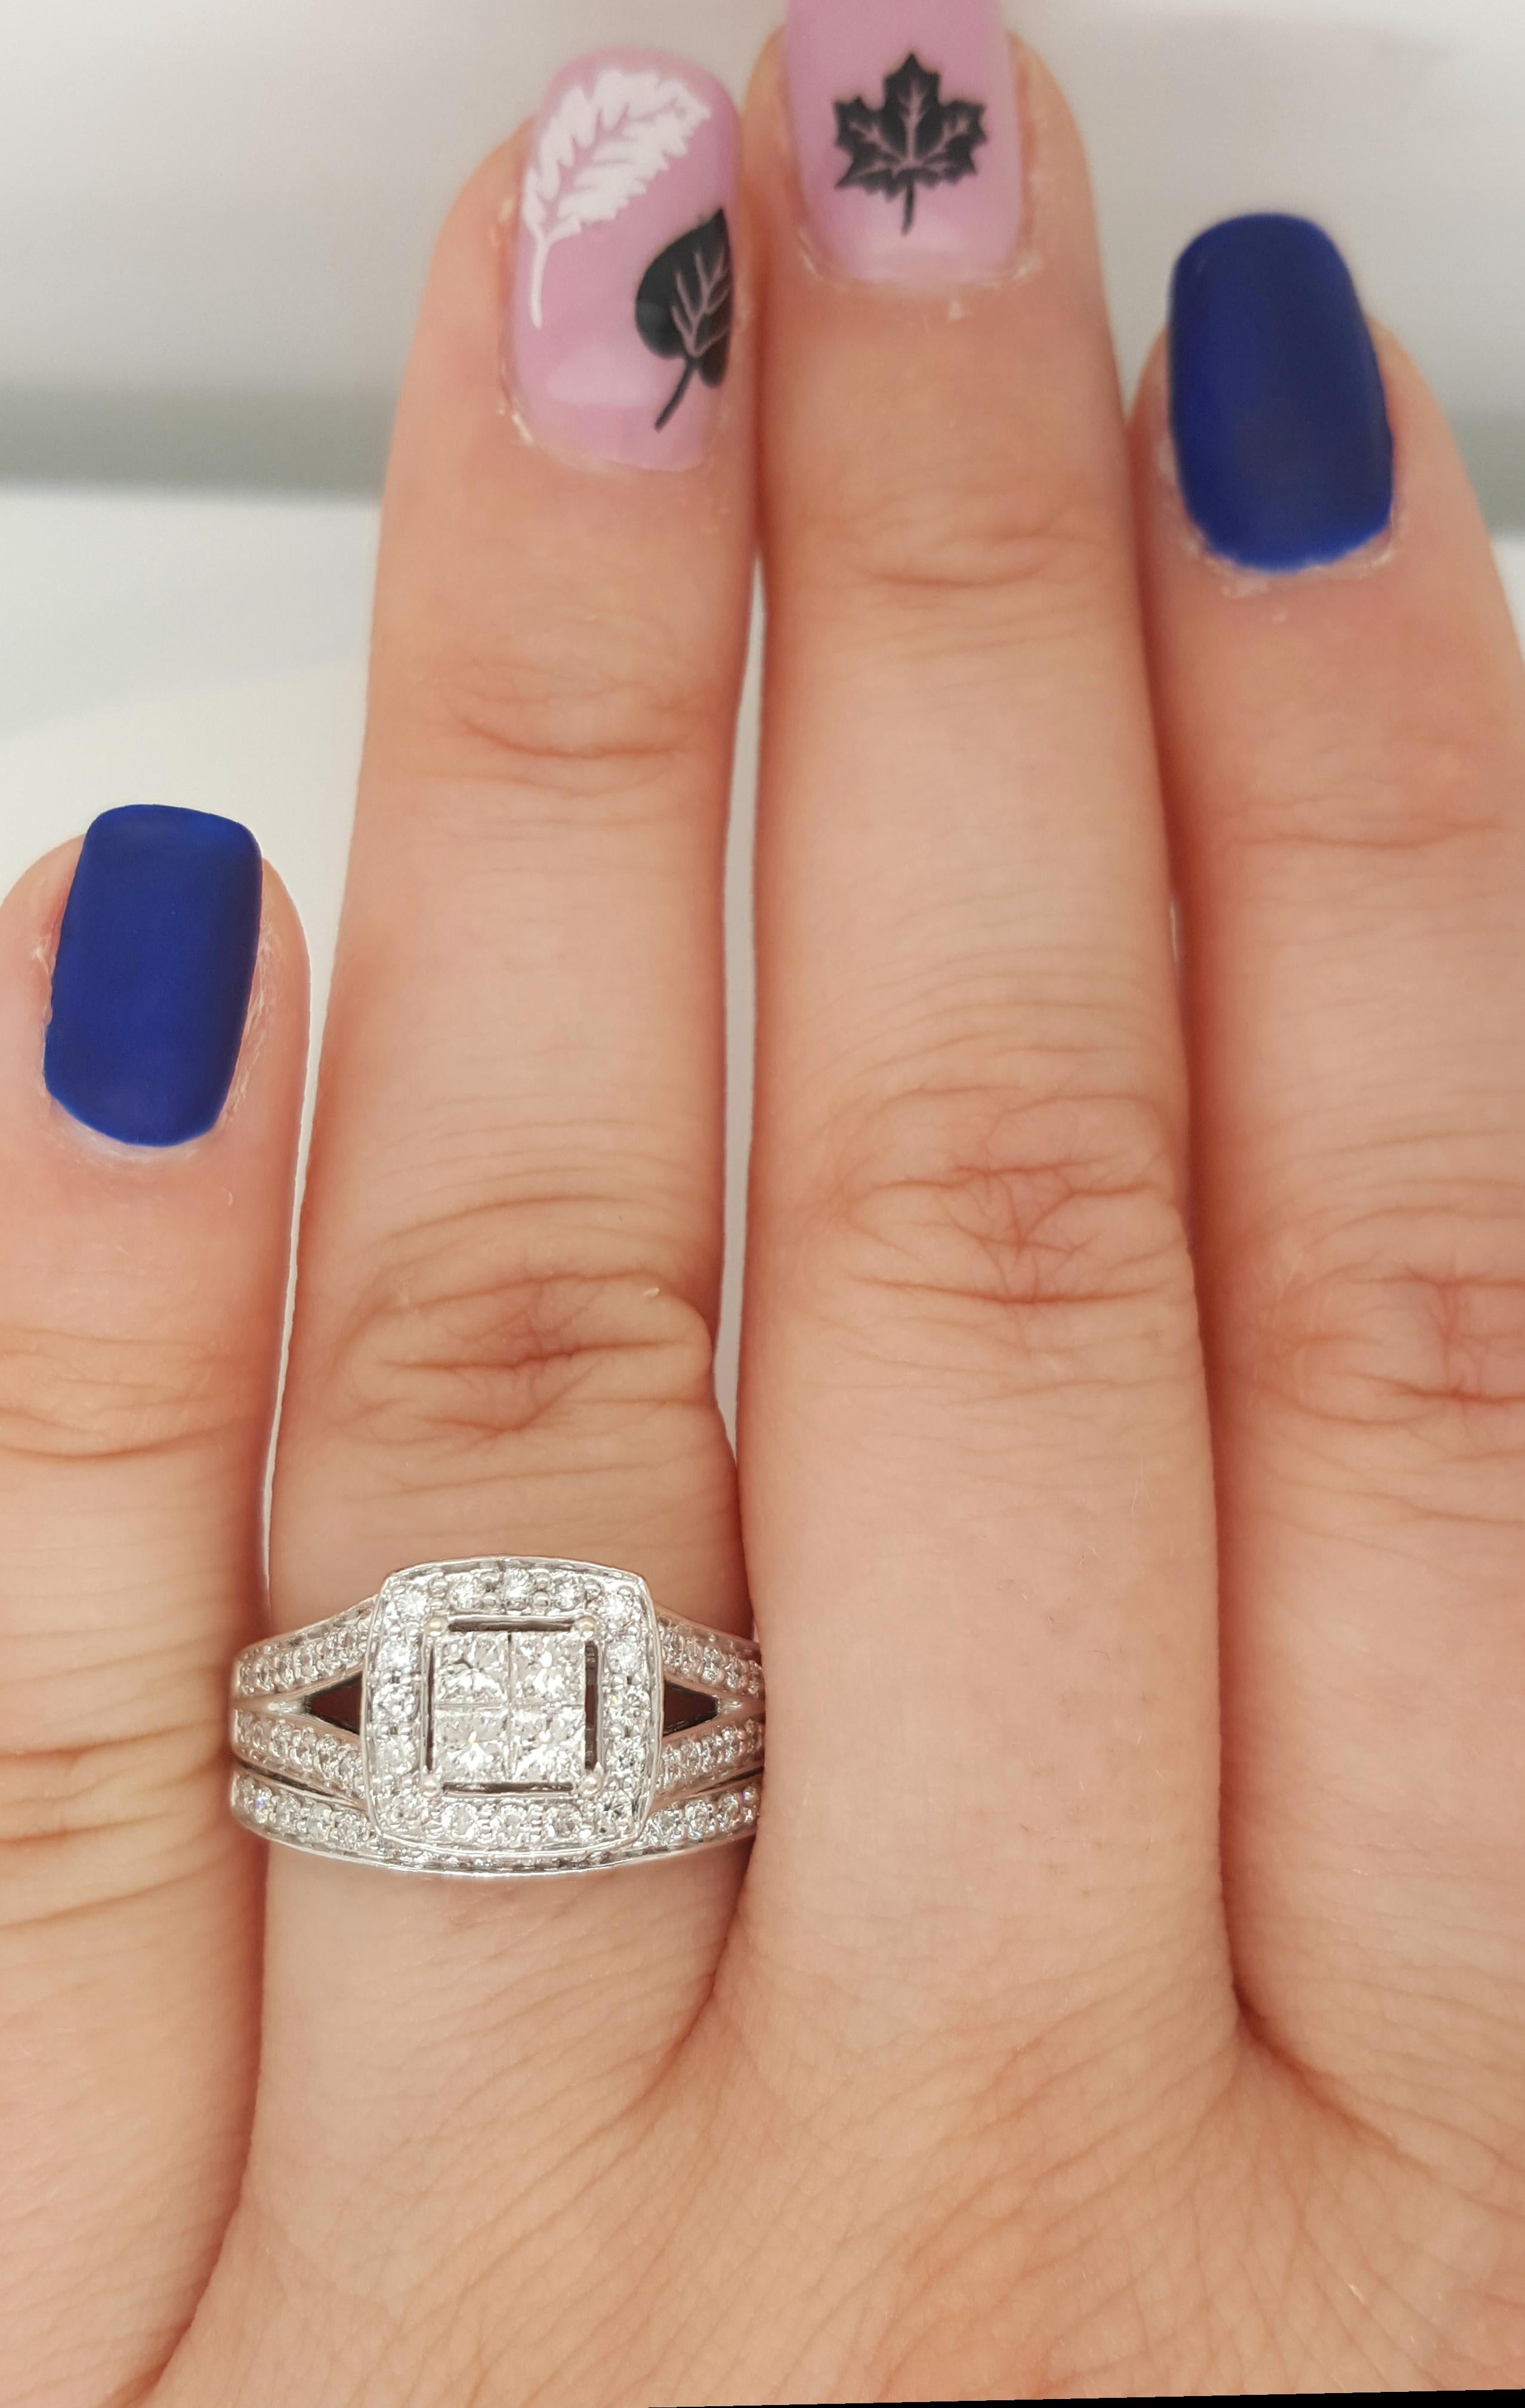 14 Karat White Gold Princess Cut Diamond Cluster, Halo Style Engagement Ring & wedding band. This beautifully crafted ring  has the look of a large center diamond which is comprised of four invisibly set princess cut diamonds surrounded by a halo of